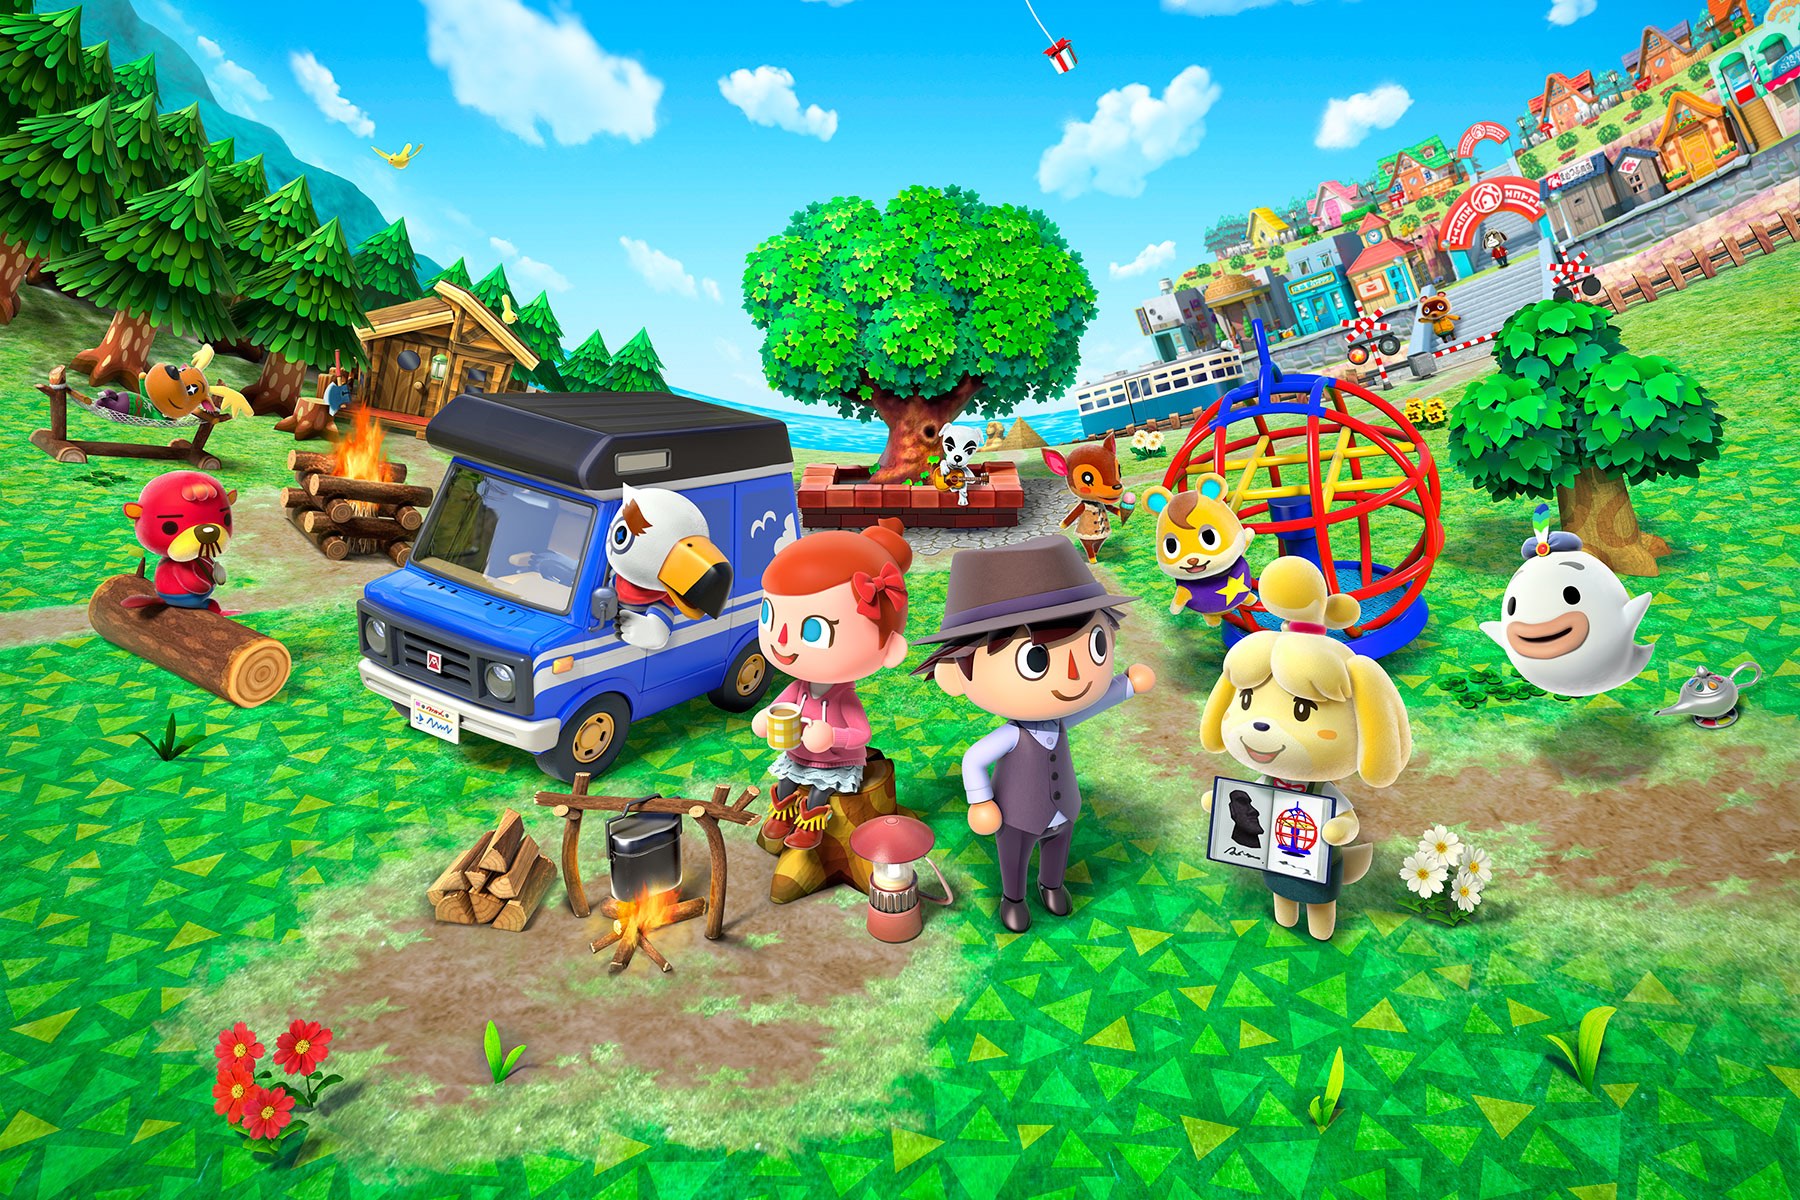 So, Why Is Everyone Losing Their Minds Over 'Animal Crossing' Switch?